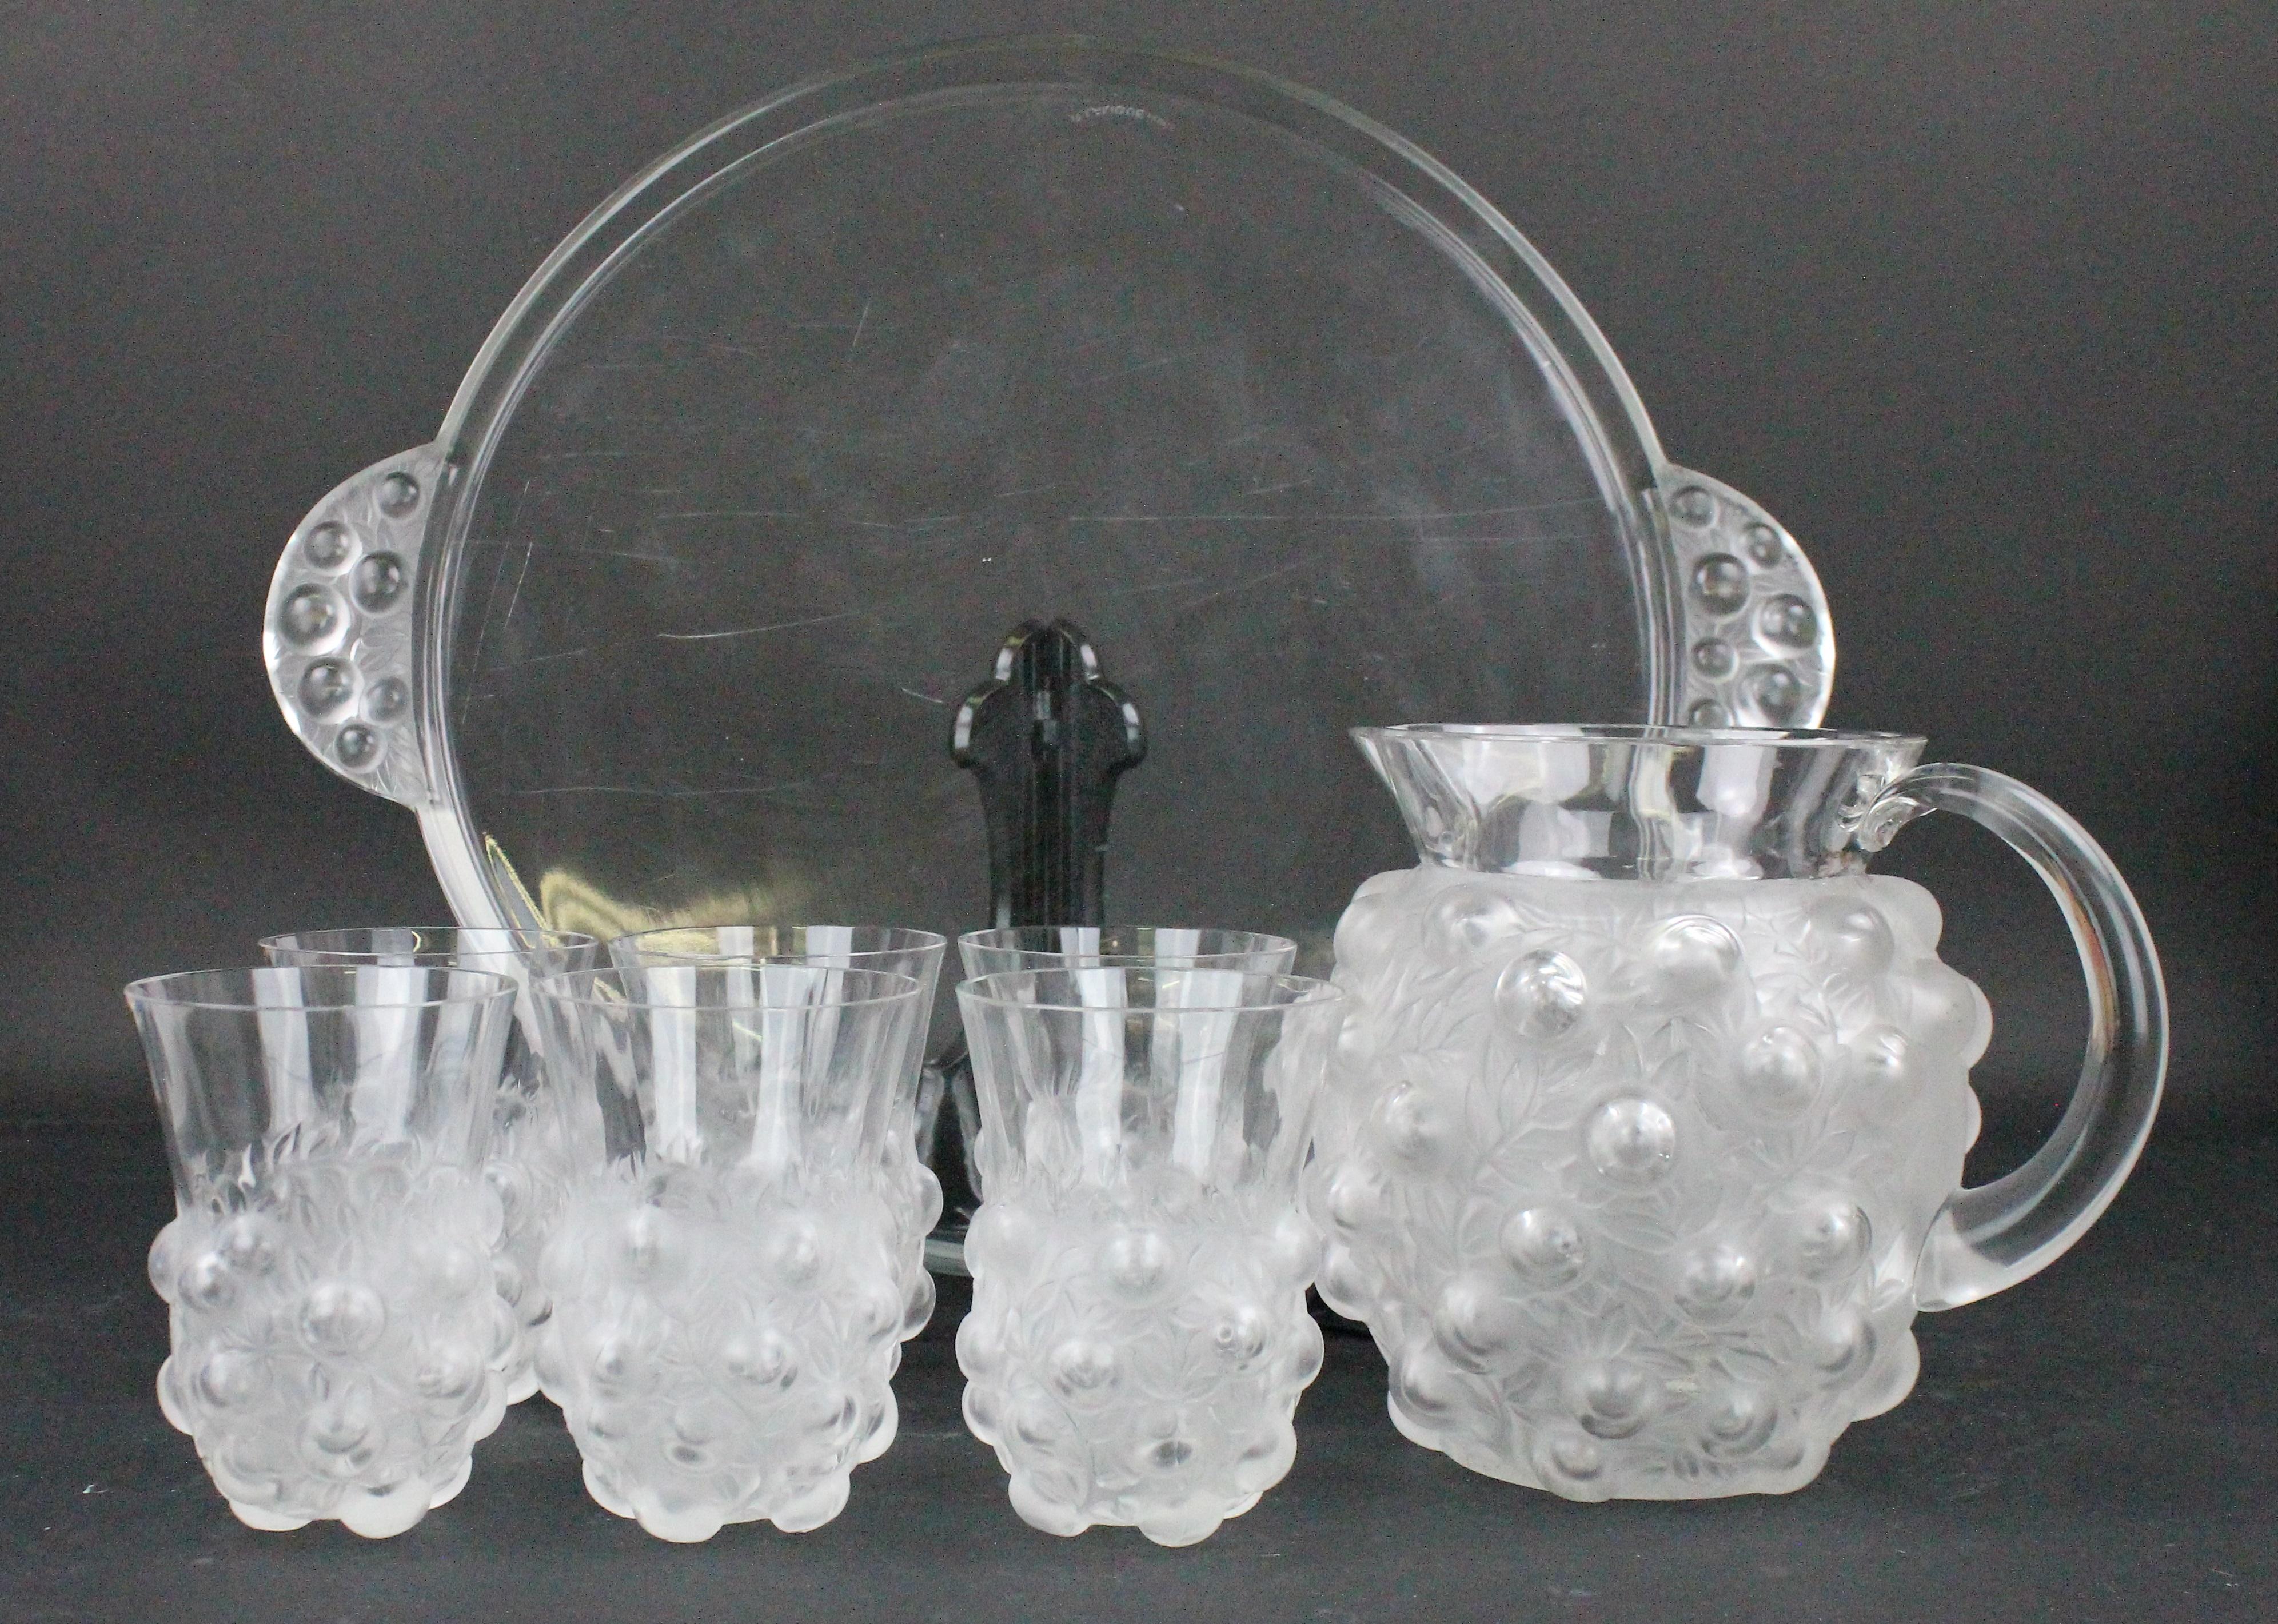 Eight-piece lemonade set by René Lalique. One tray, one pitcher and six glasses. All eight pieces in perfect condition (some minor scratches underneath). There are no damages or nicks. This model has not been manufactured by Lalique after 1947. All